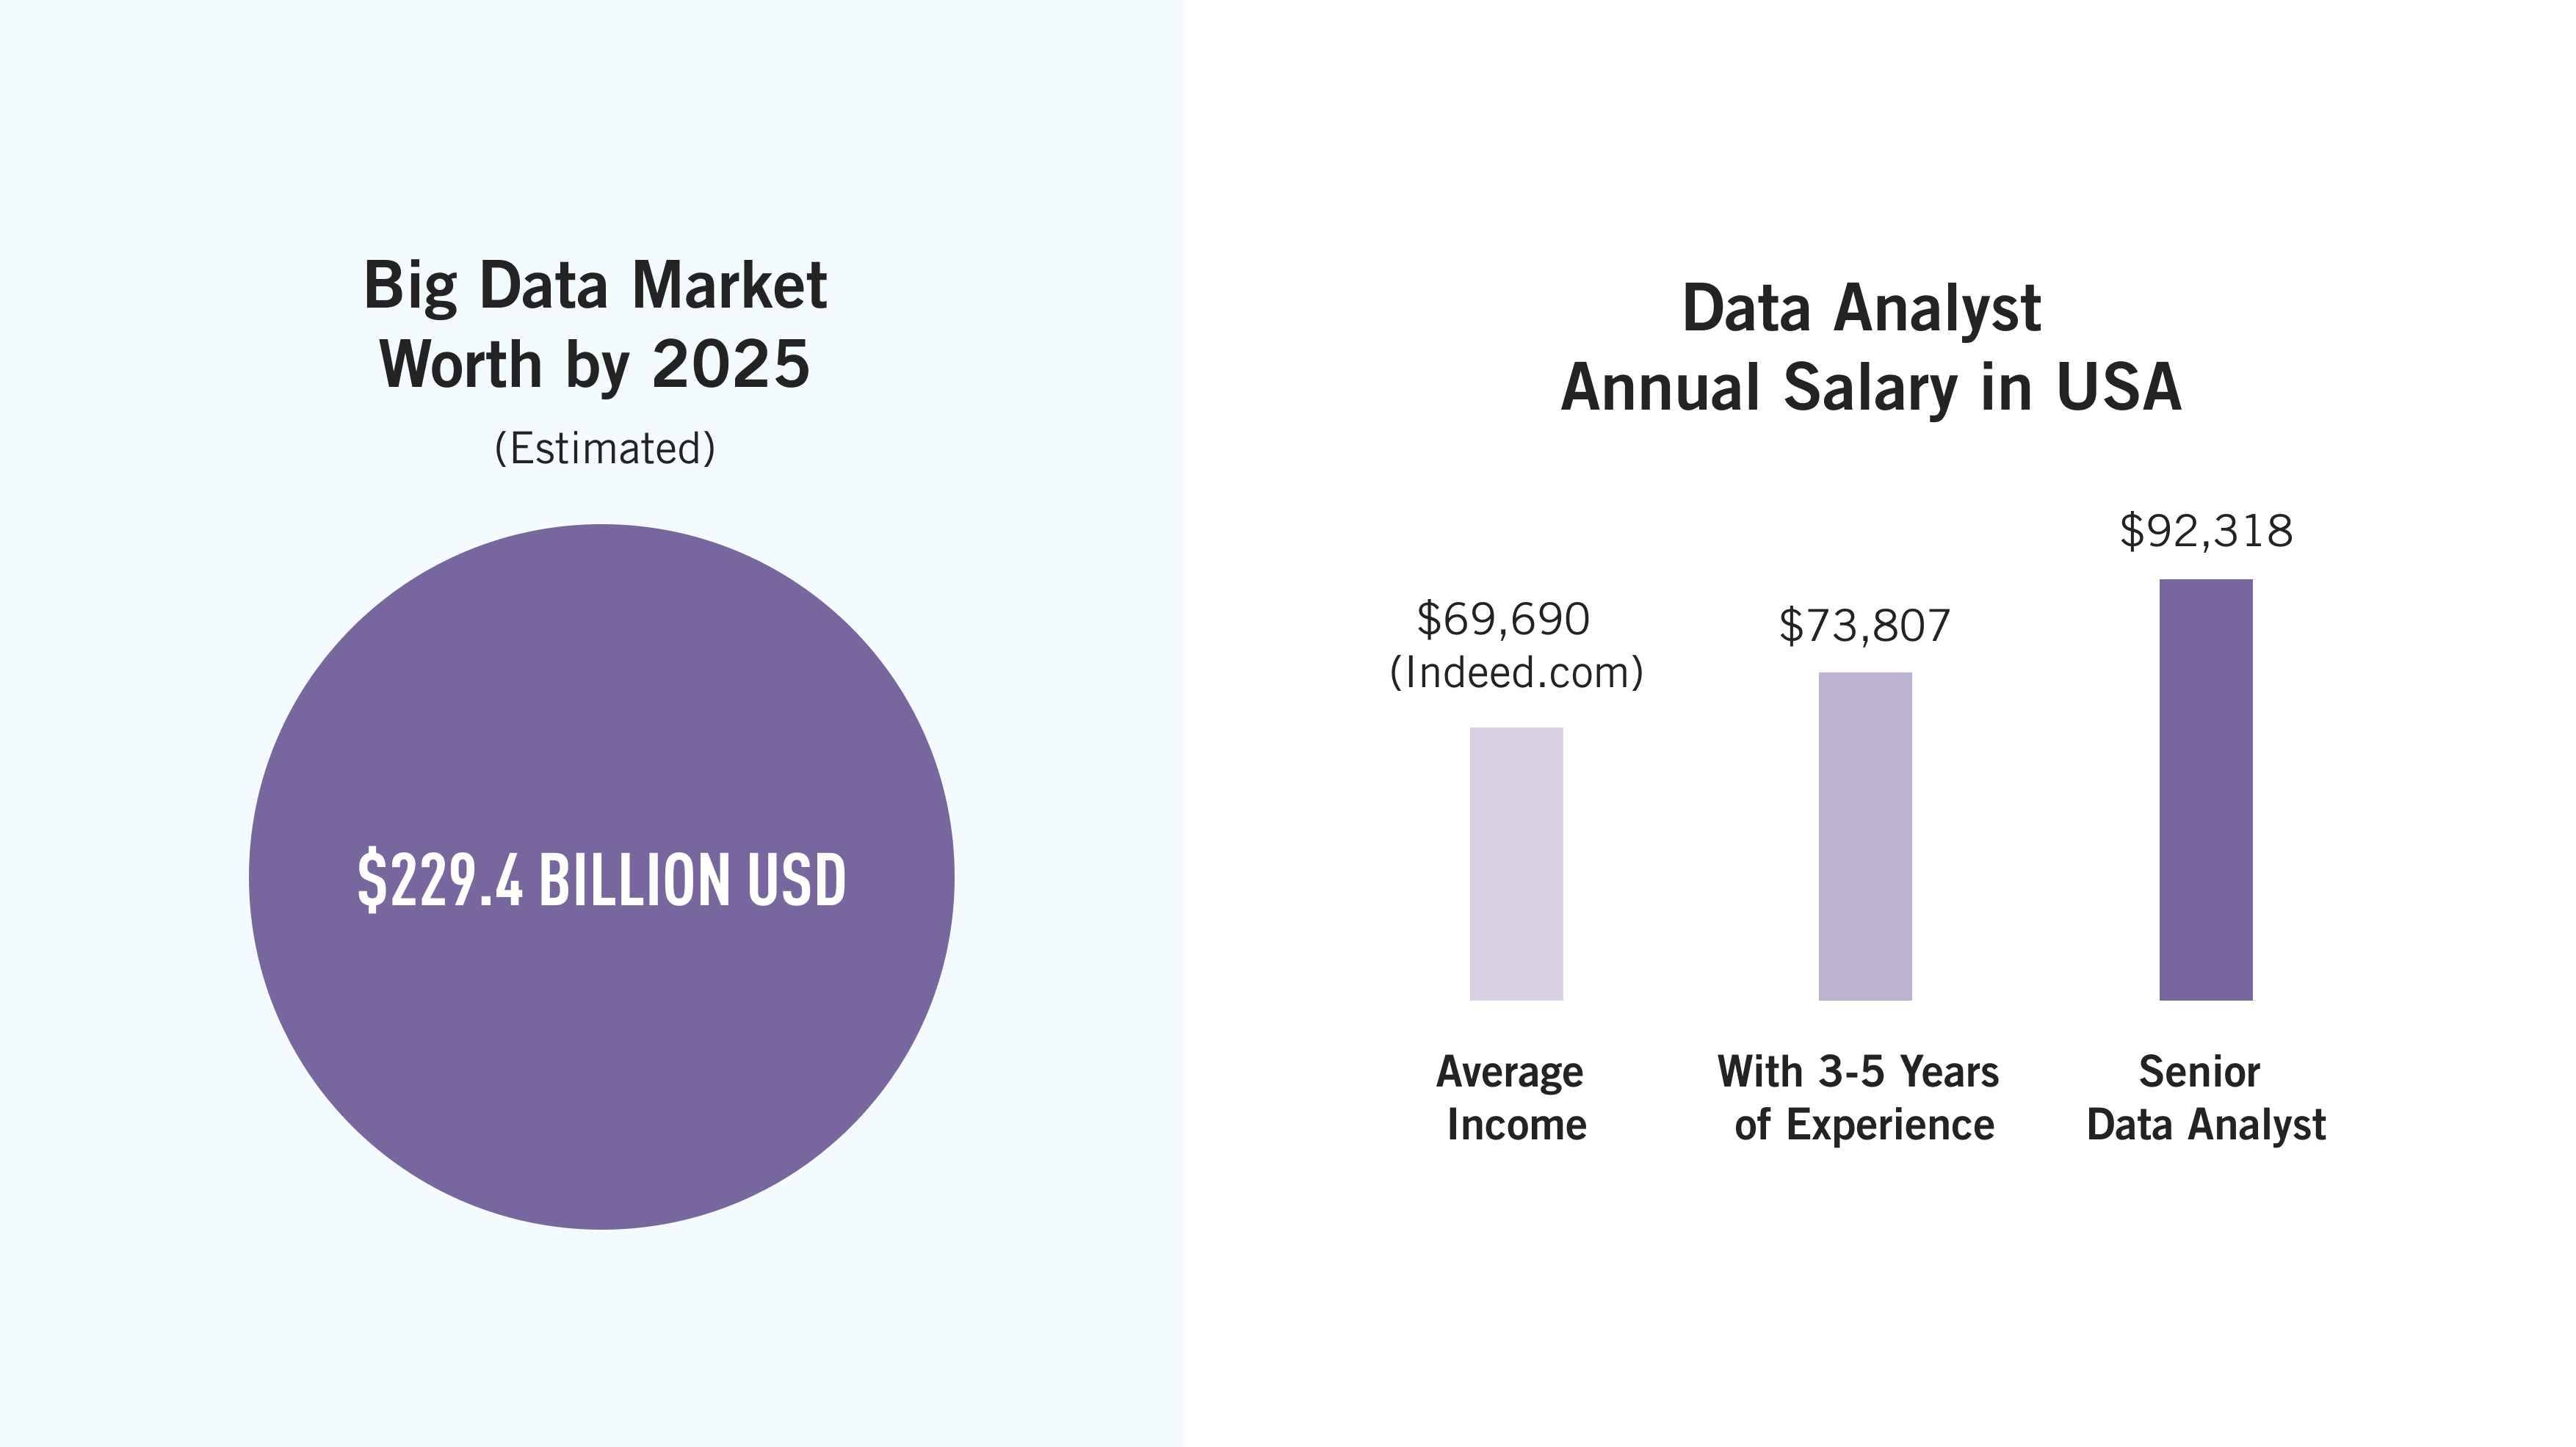 The big data market estimated worth by 2025, and a bar graph showing the average data analyst salary in the United States based on years of experience